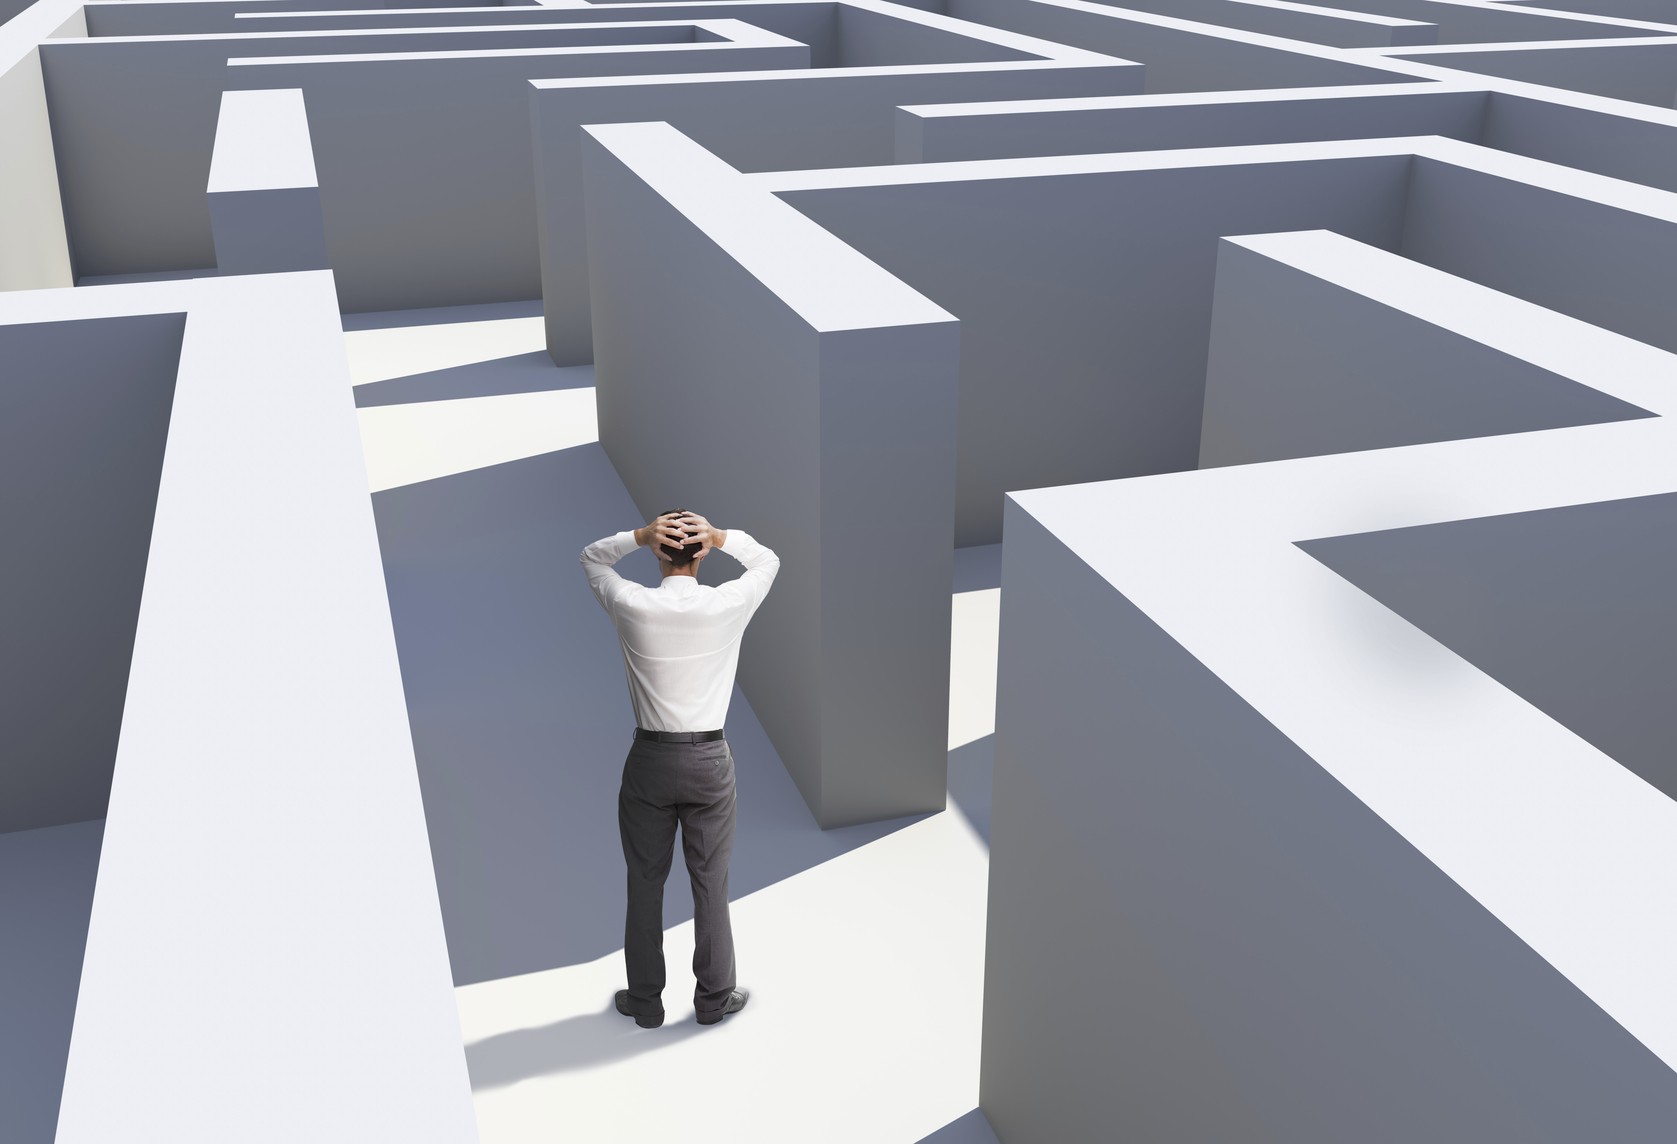 Frustrated man lost in a maze